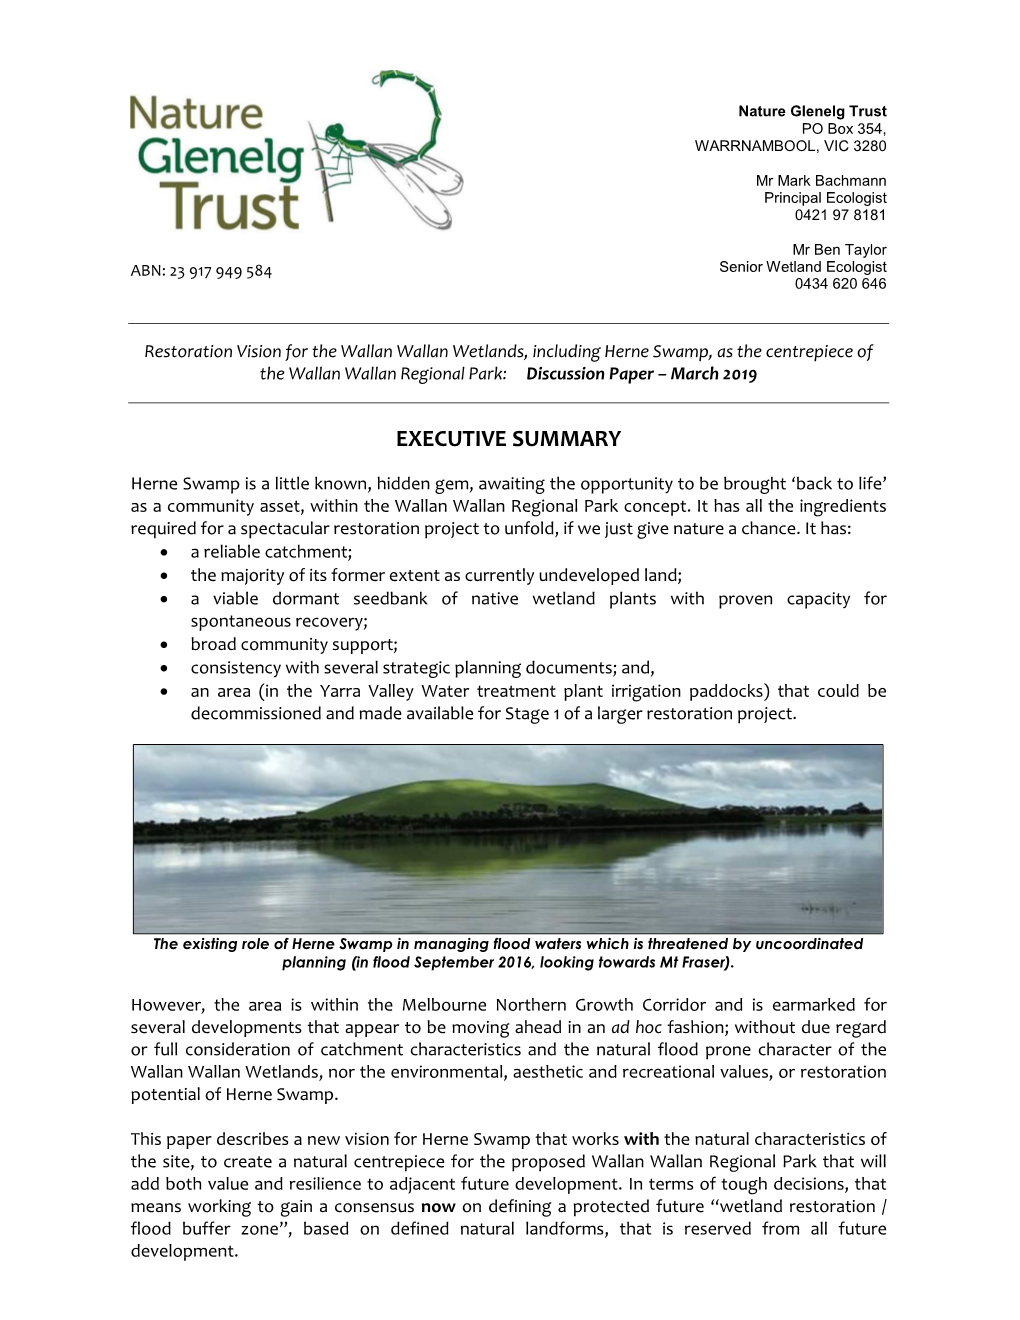 NGT Discussion Paper – Herne Swamp